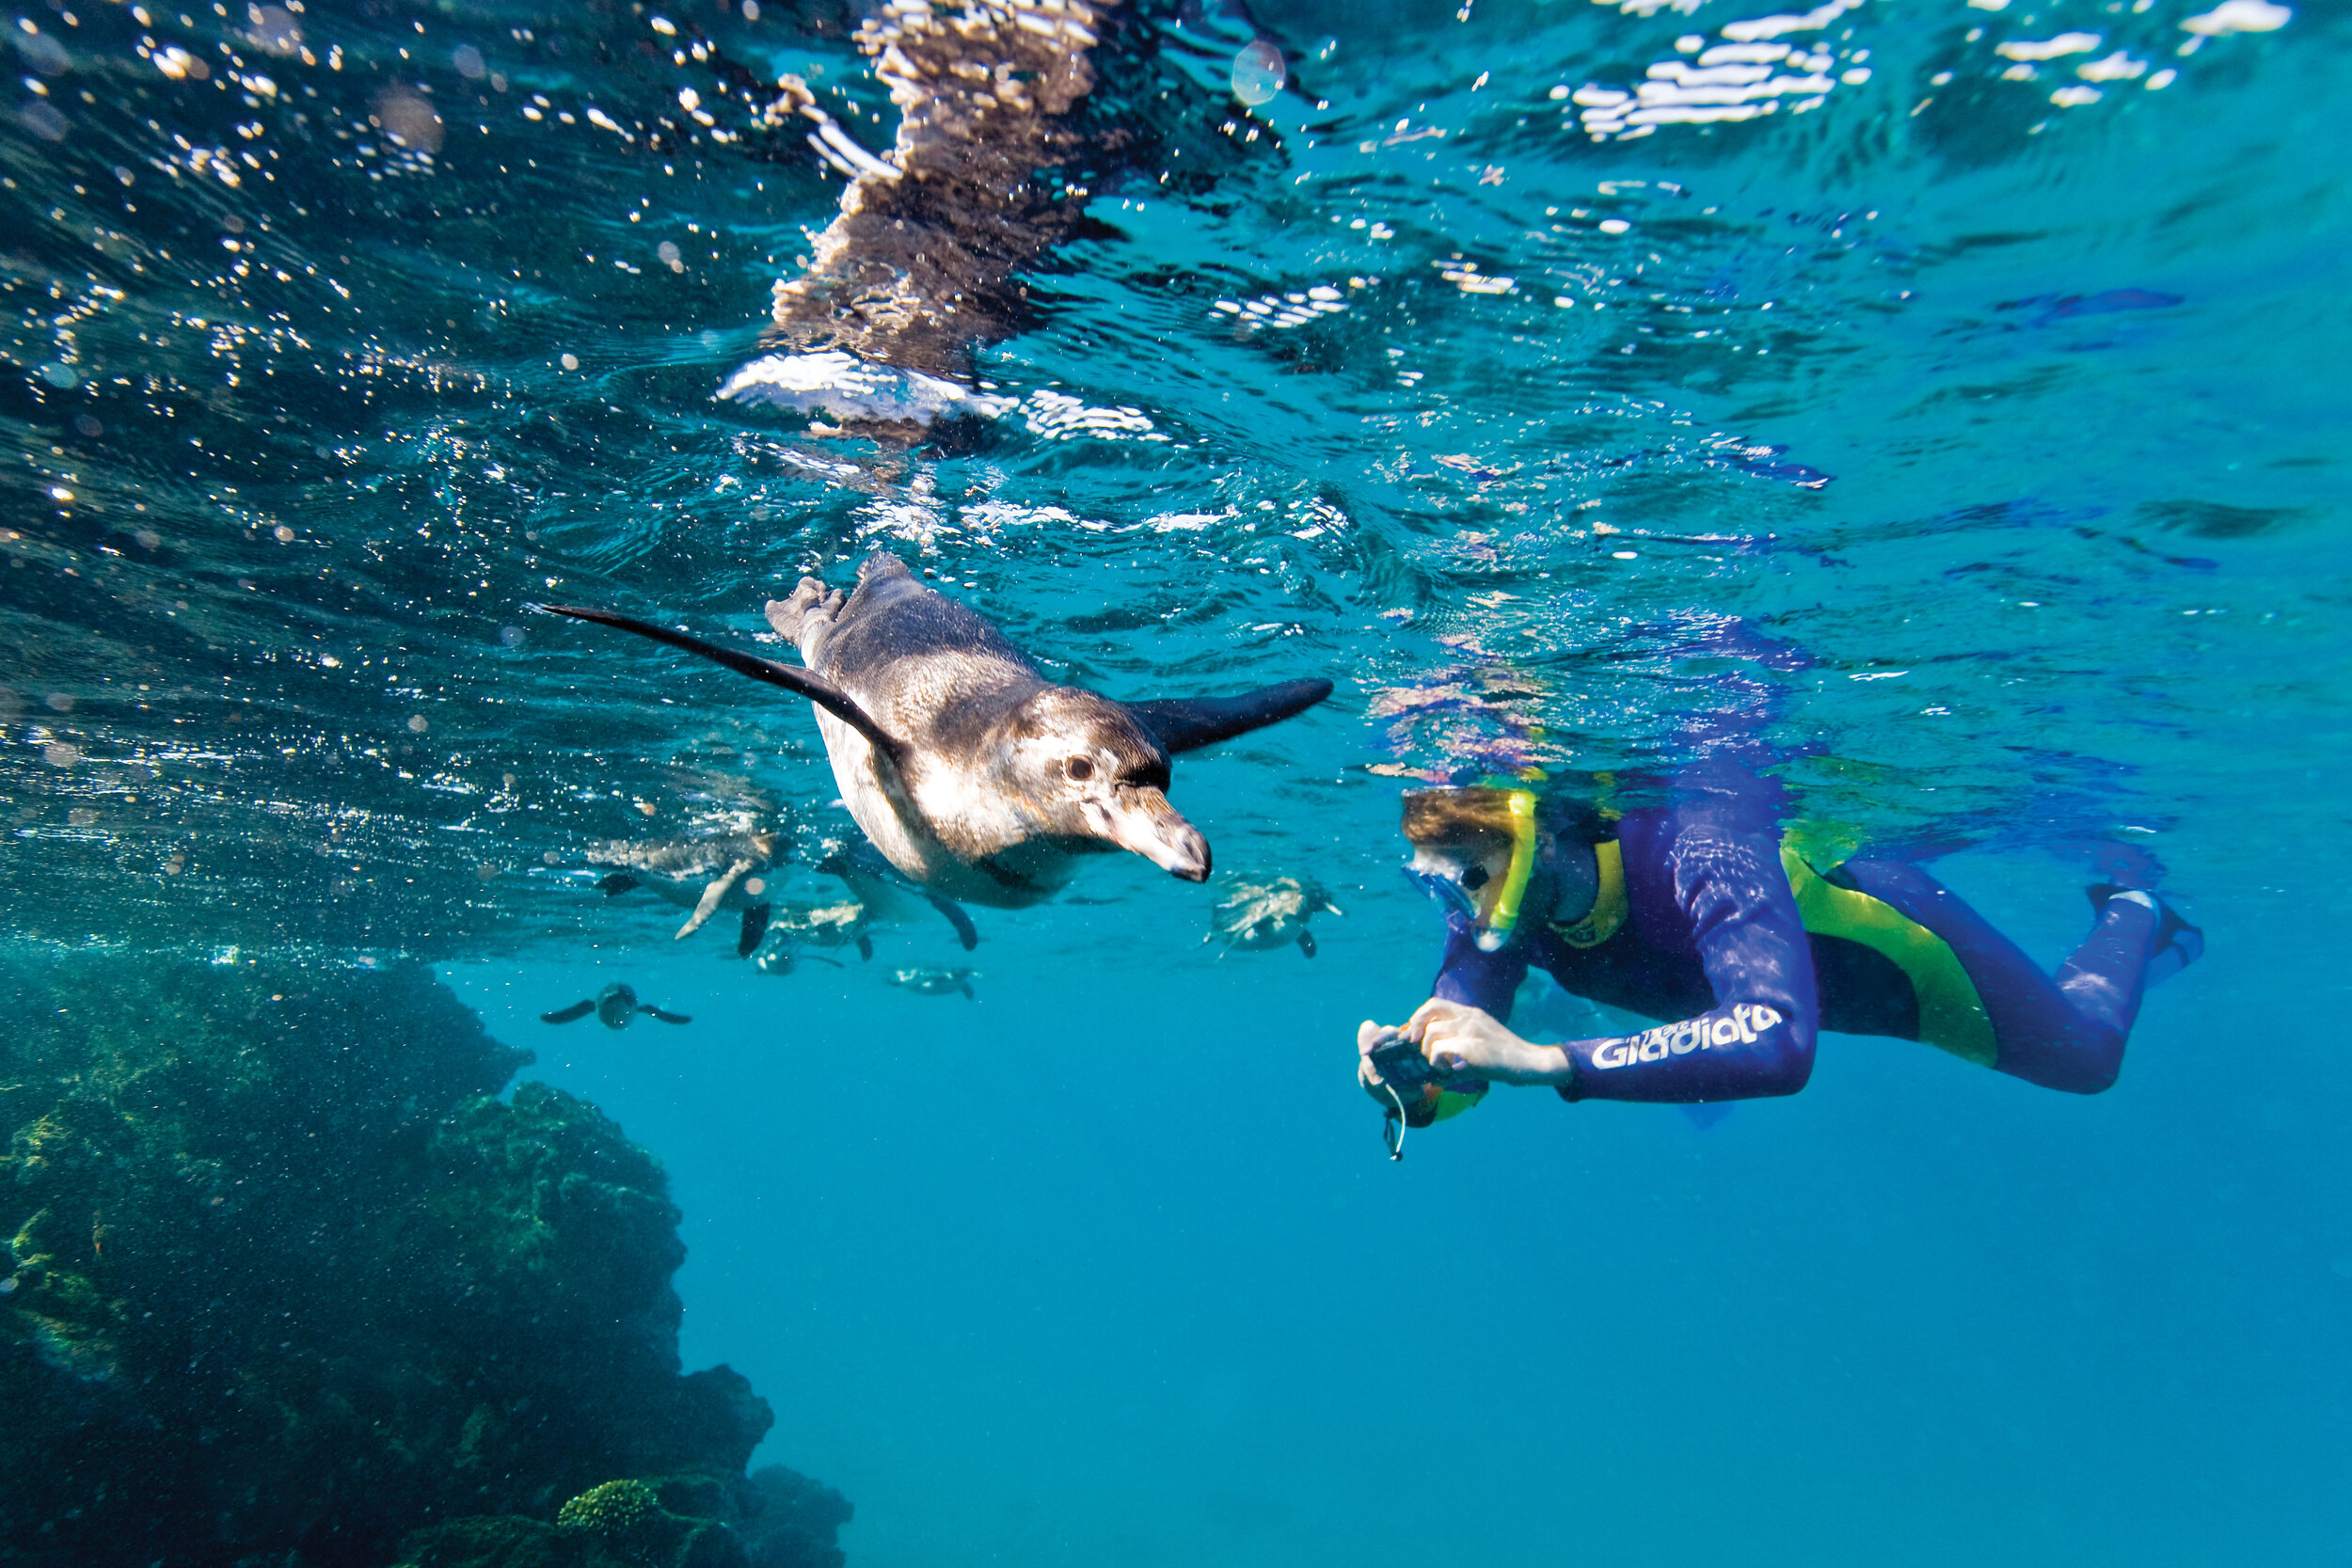   Adult Galápagos penguin hunting fish underwater (photo credit: Lindblad Expeditions)  